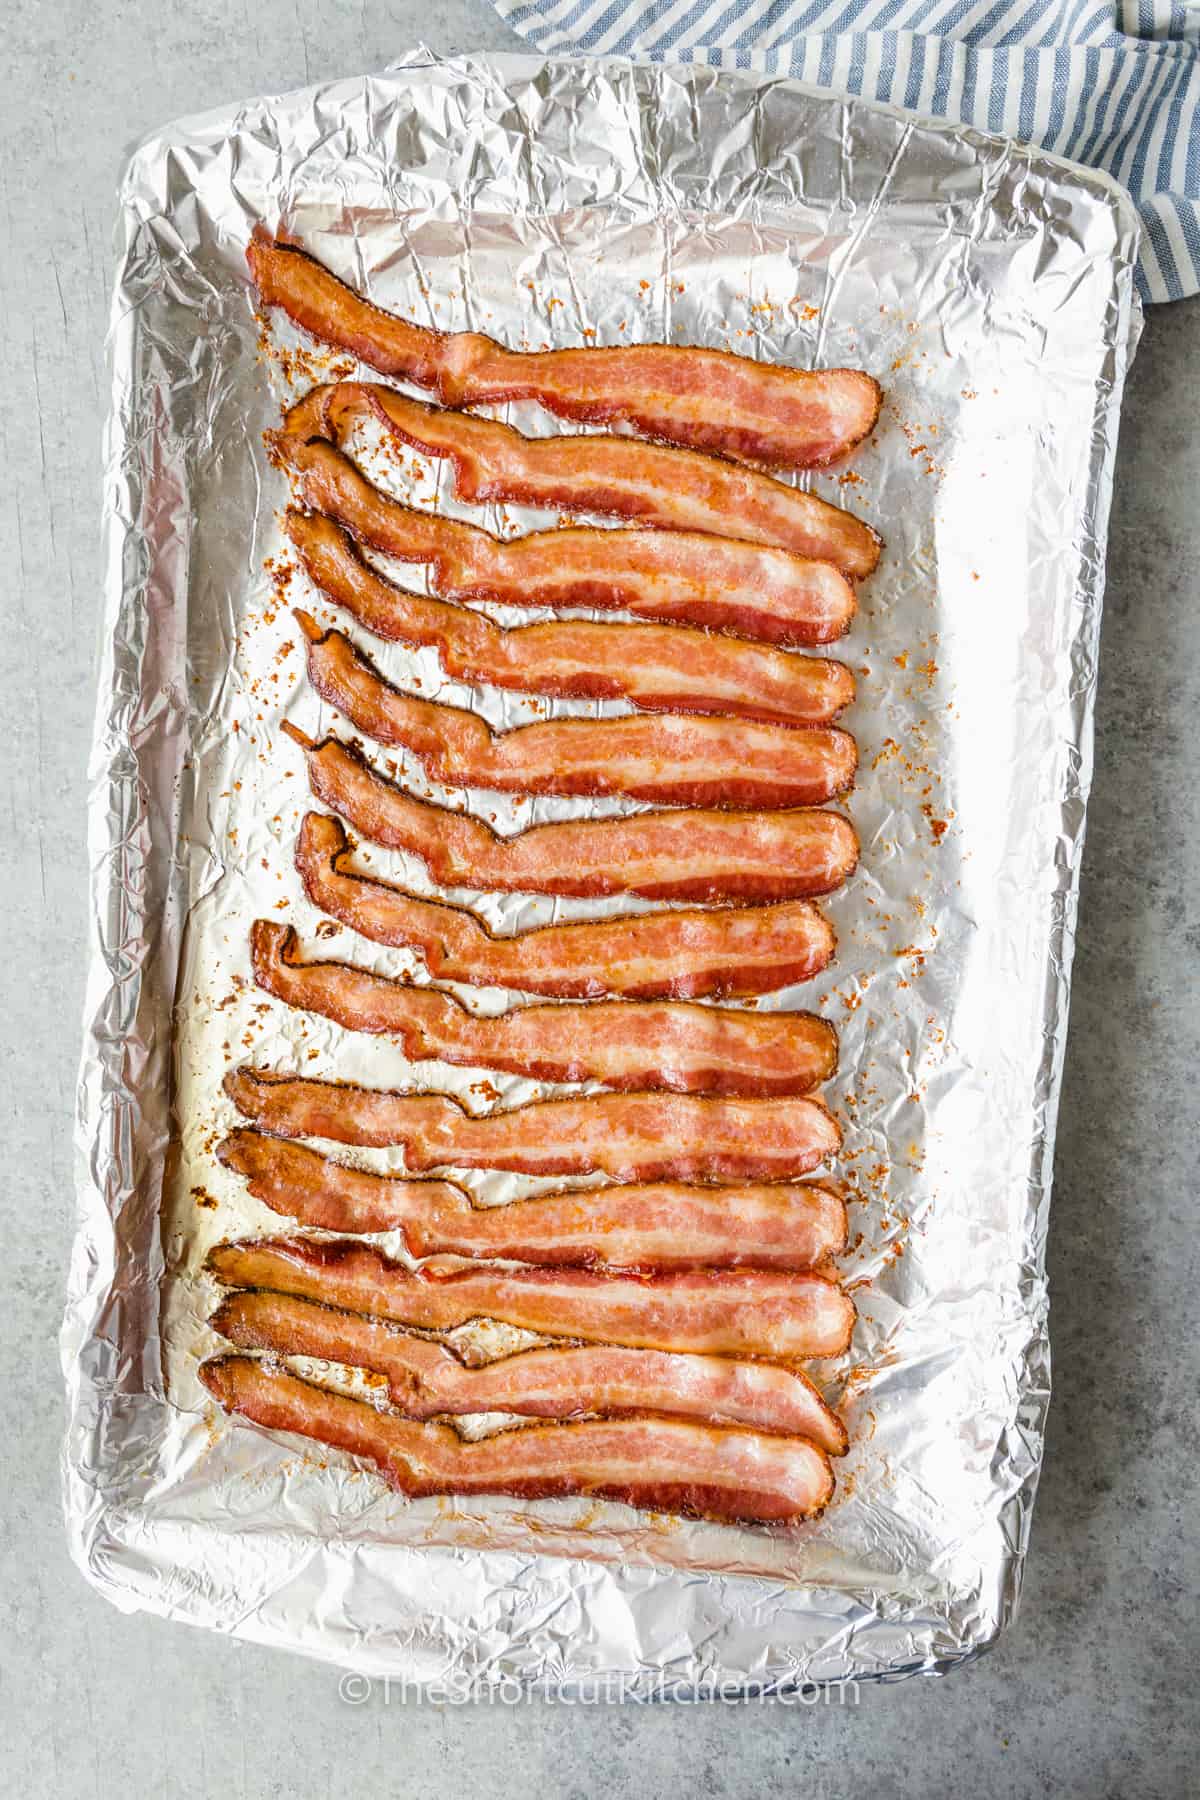 cooked oven baked bacon, lined up in a row, on a foiled lined baking sheet